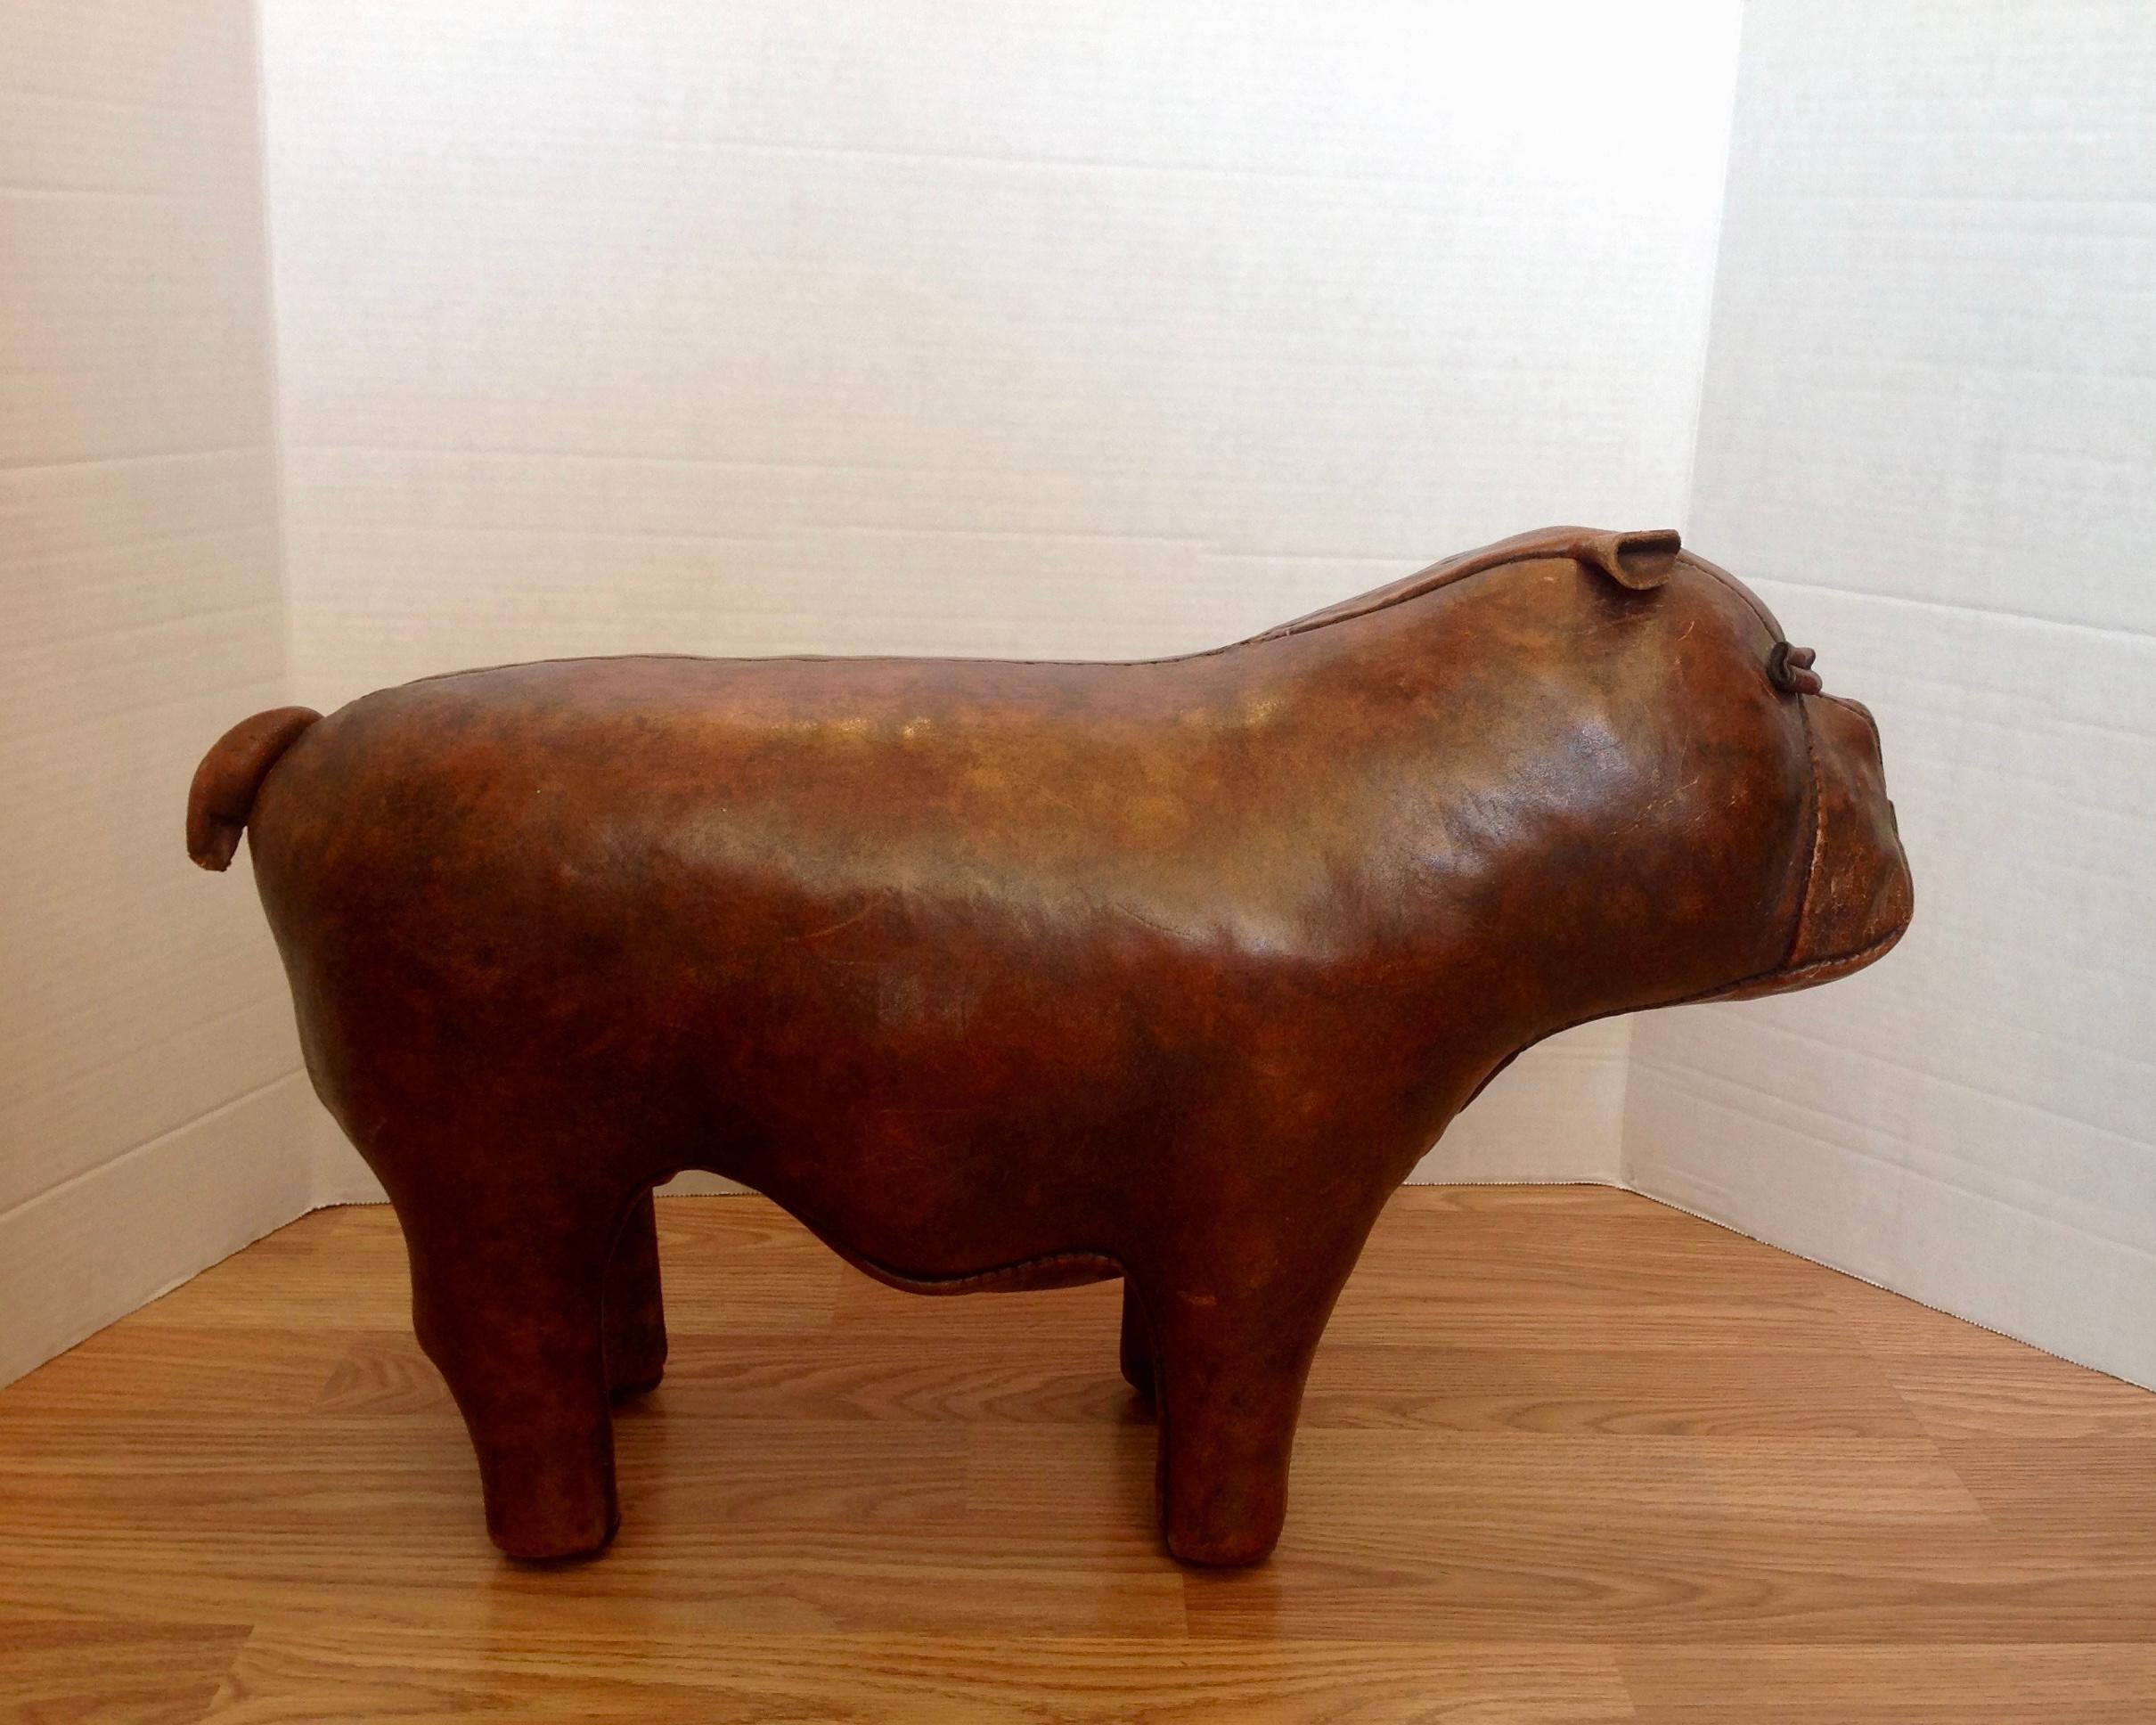 Leather Whimsical Abercrombie's Bulldog Foot Rest by Dimitri Omersa